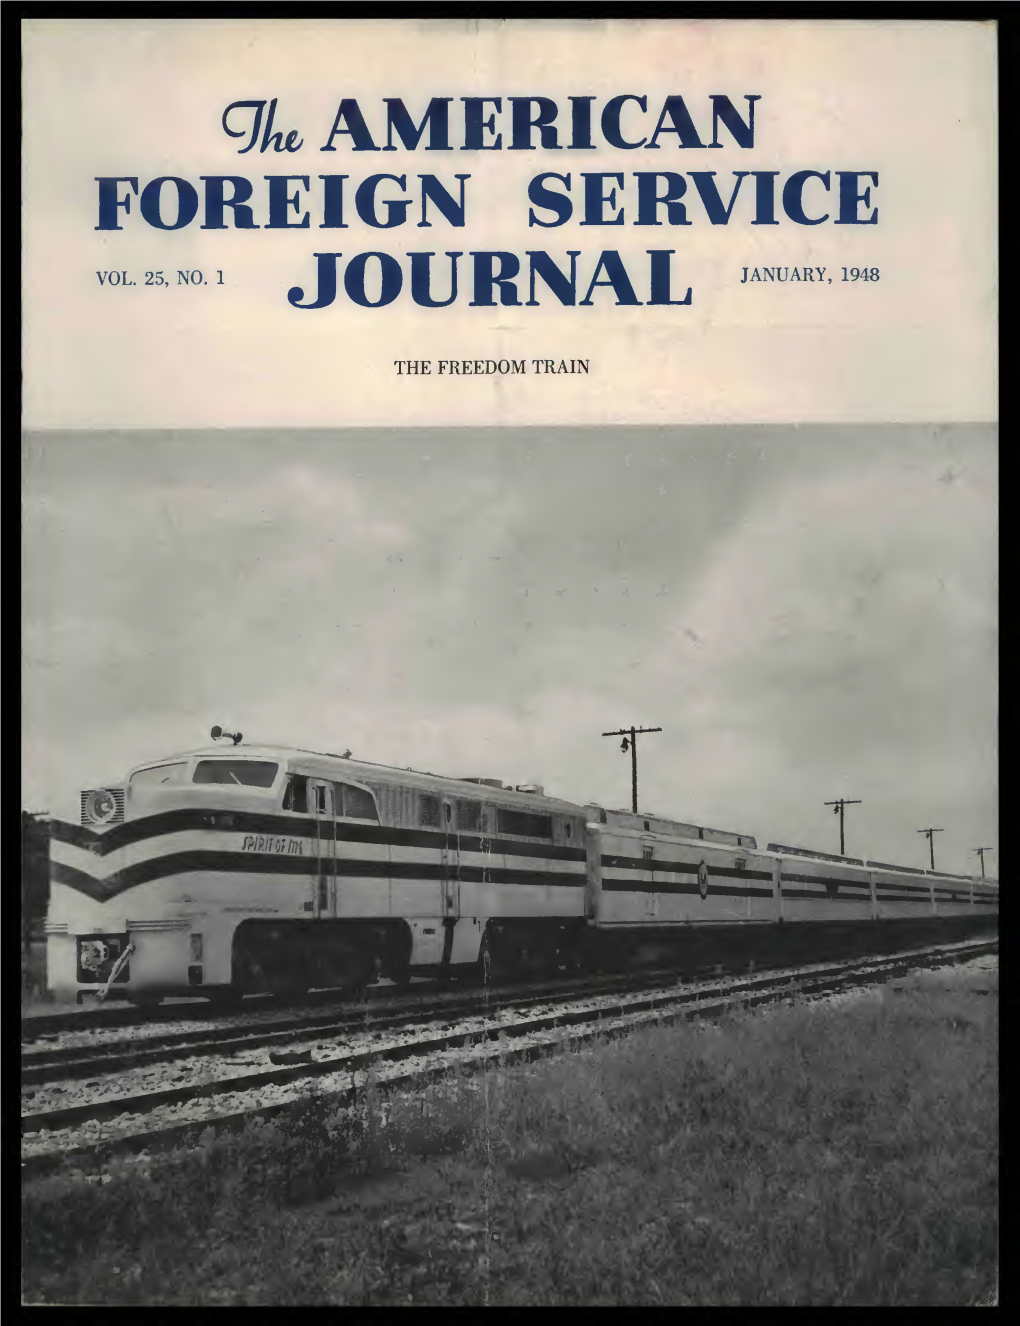 The Foreign Service Journal, January 1948